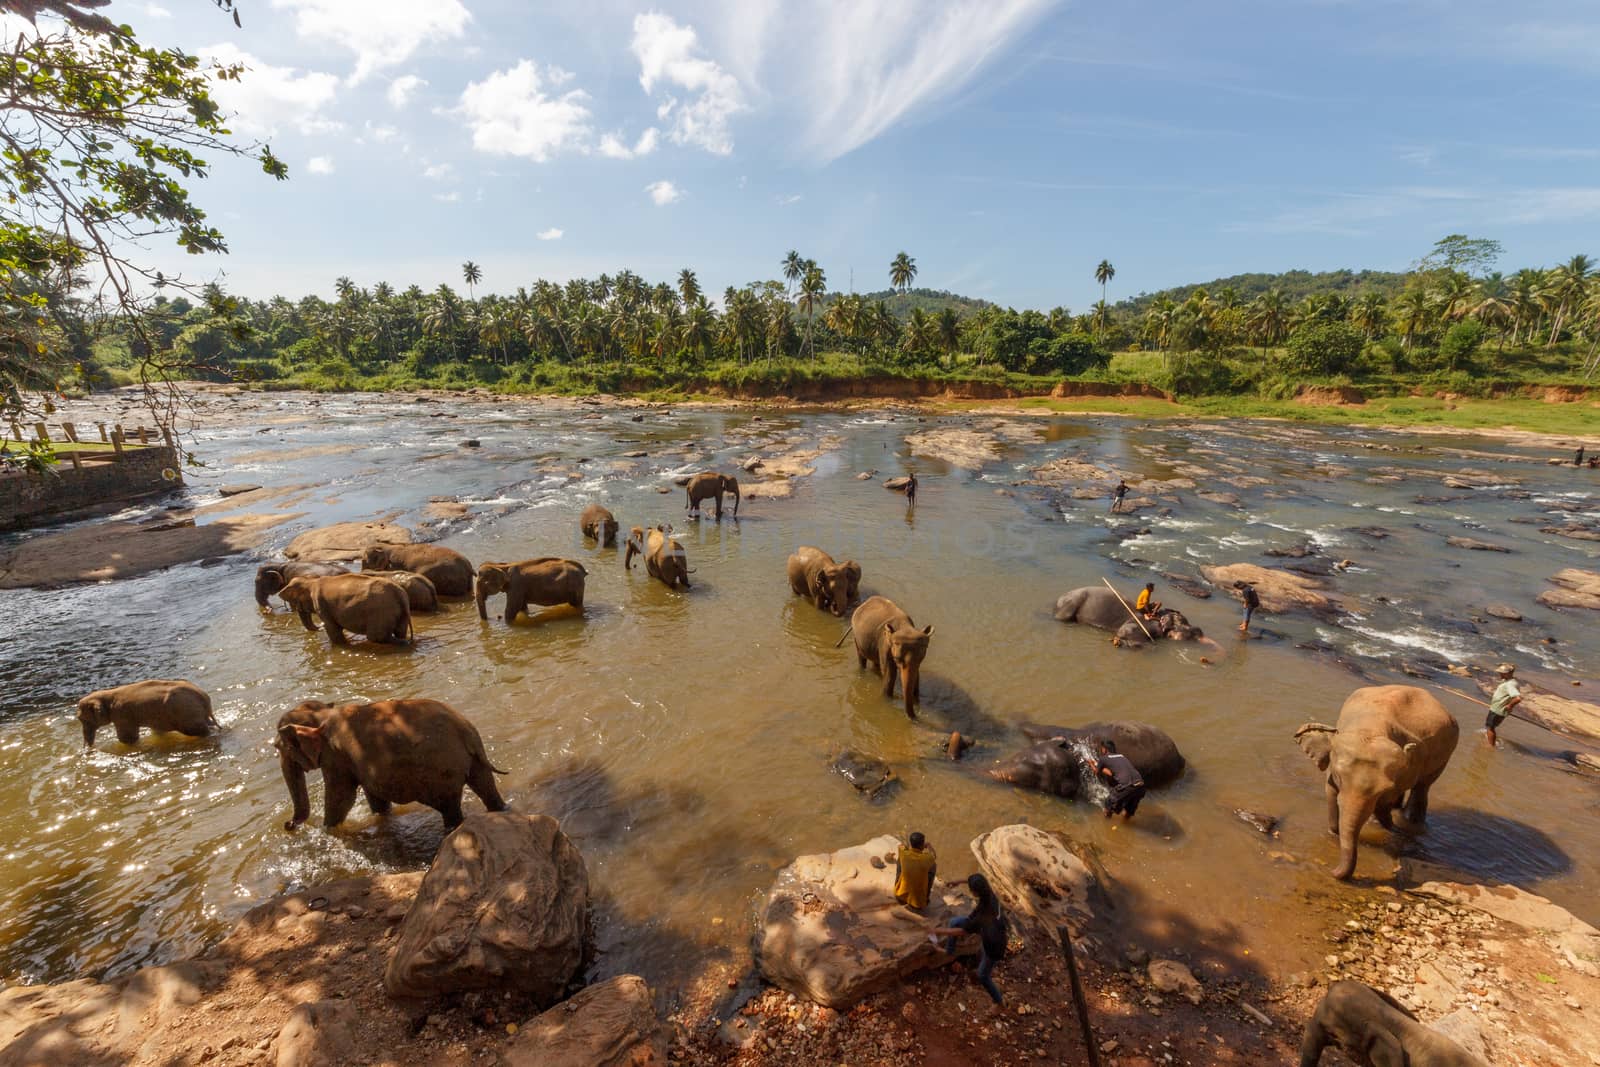 Large group of elephants having a splash in a rive to cool down from extreme heat wave. Concept of wild animals living free